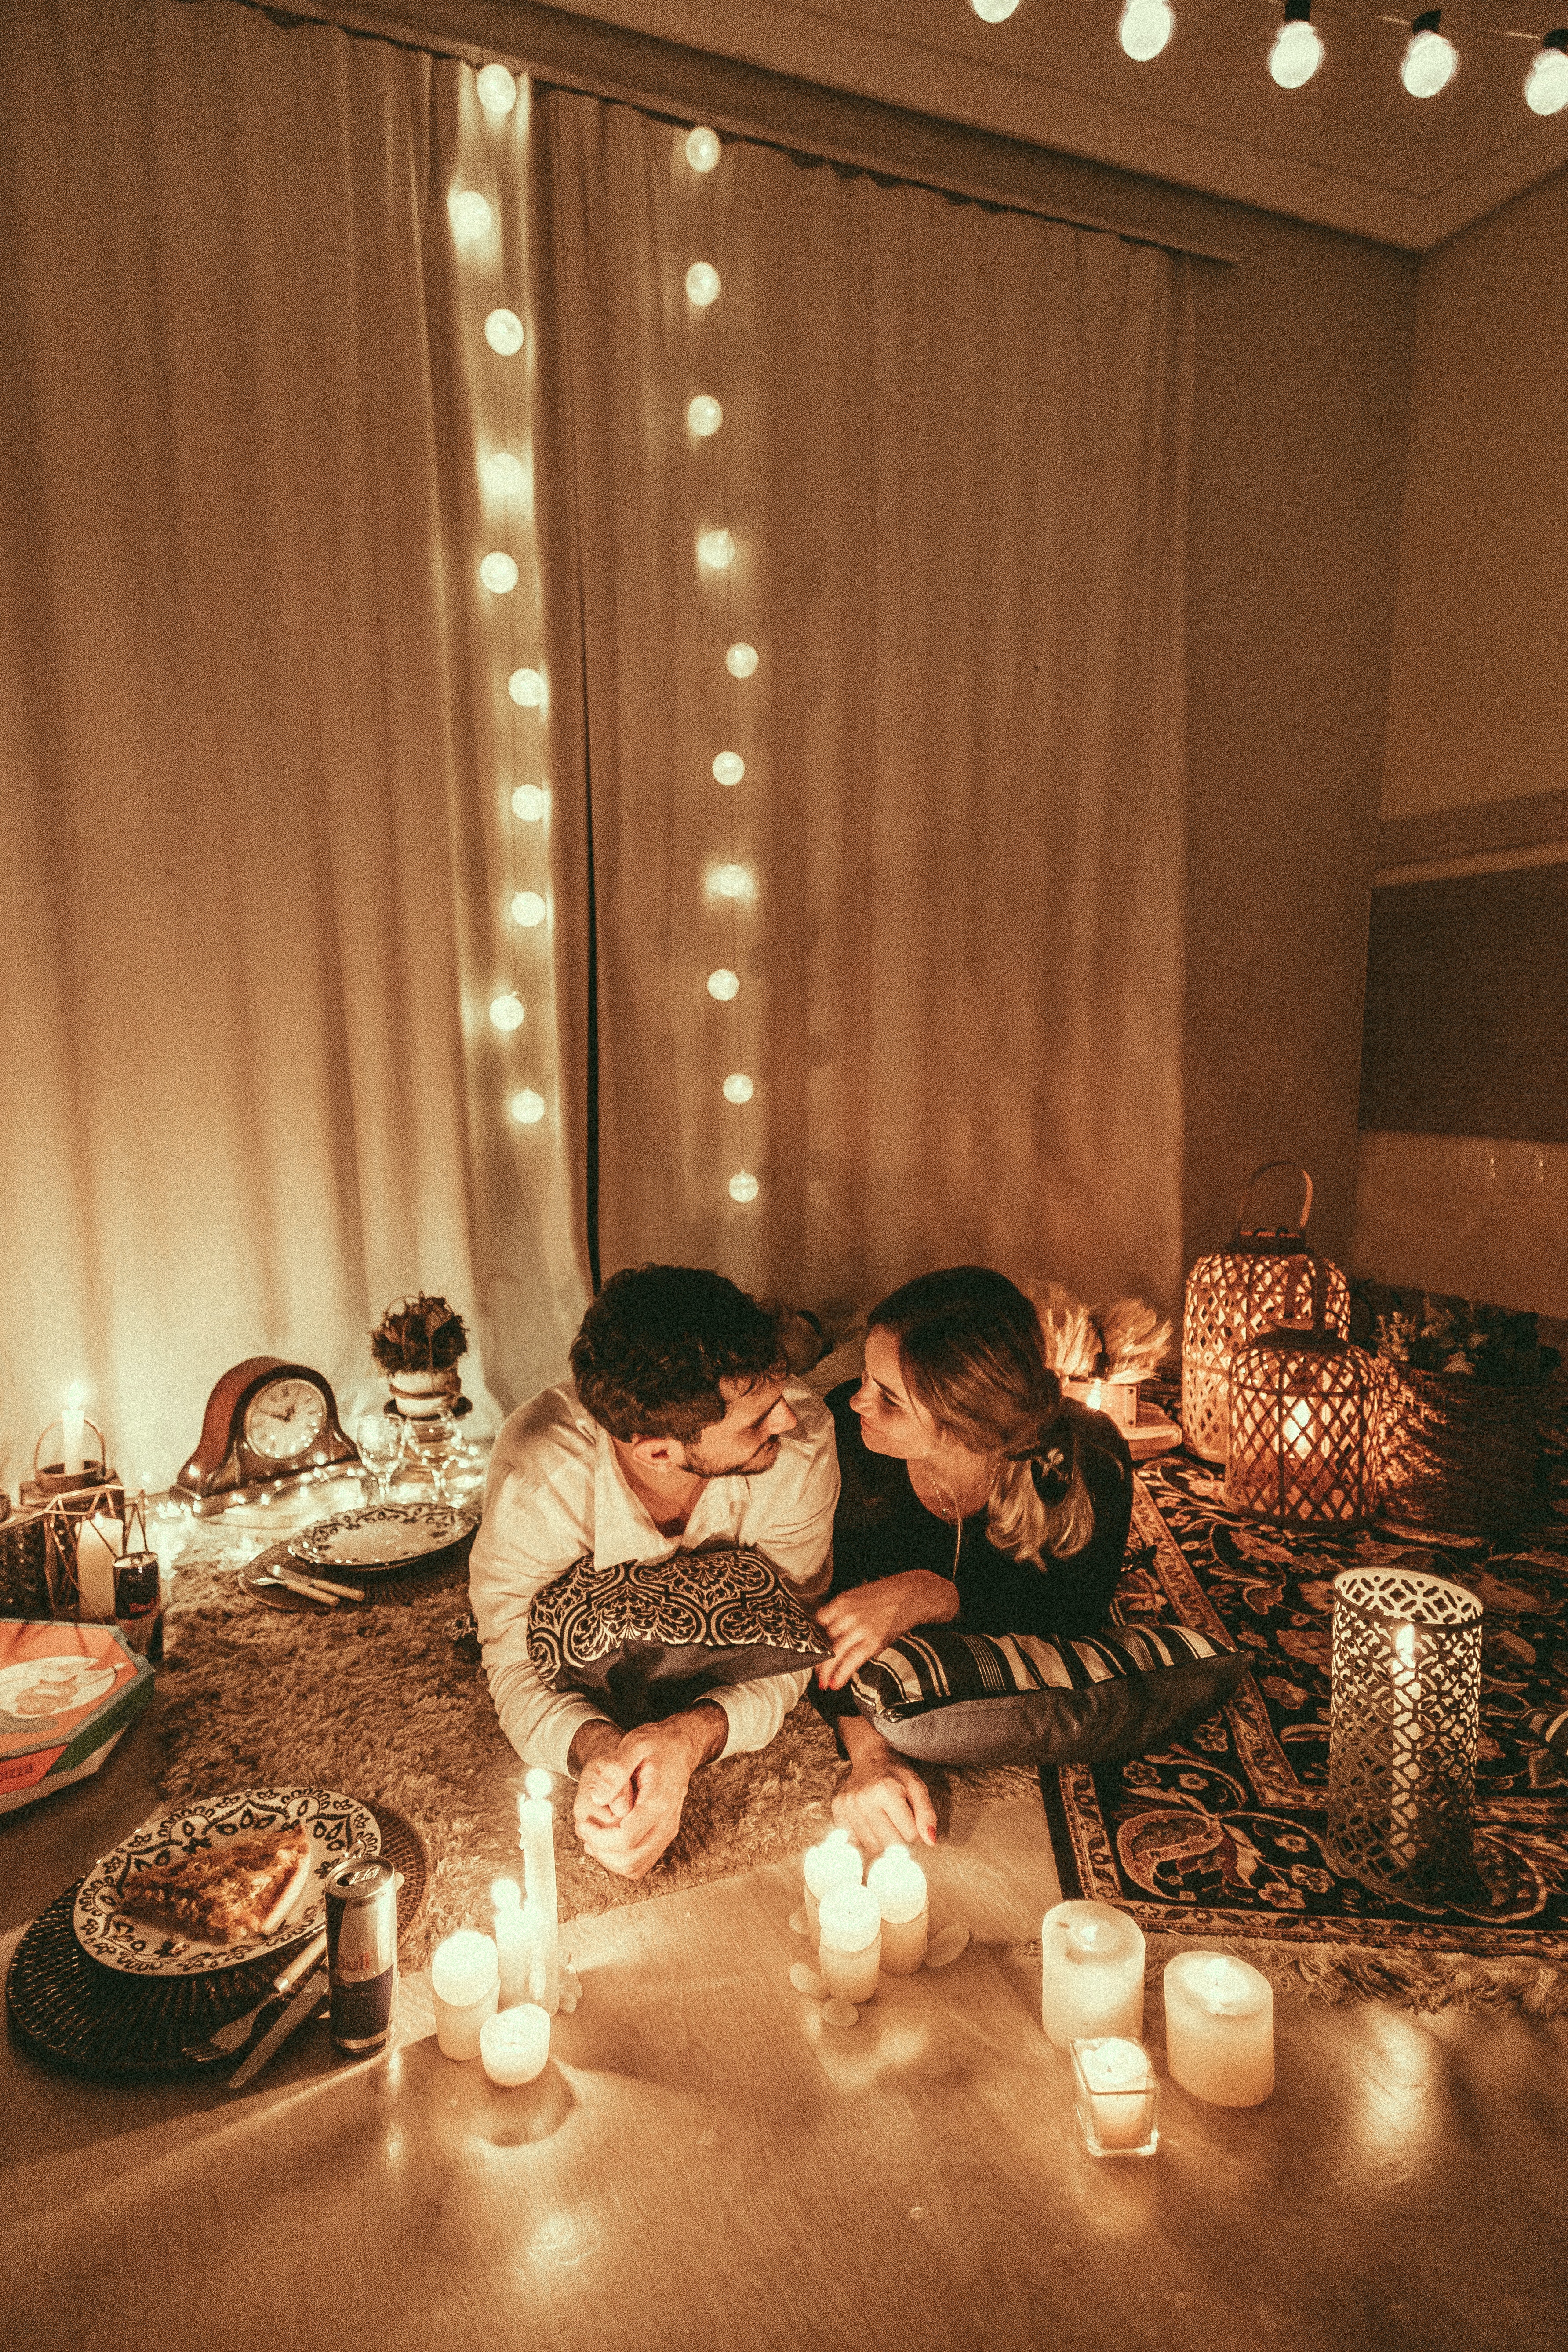 A couple having a candelight dinner. | Source: Pexels